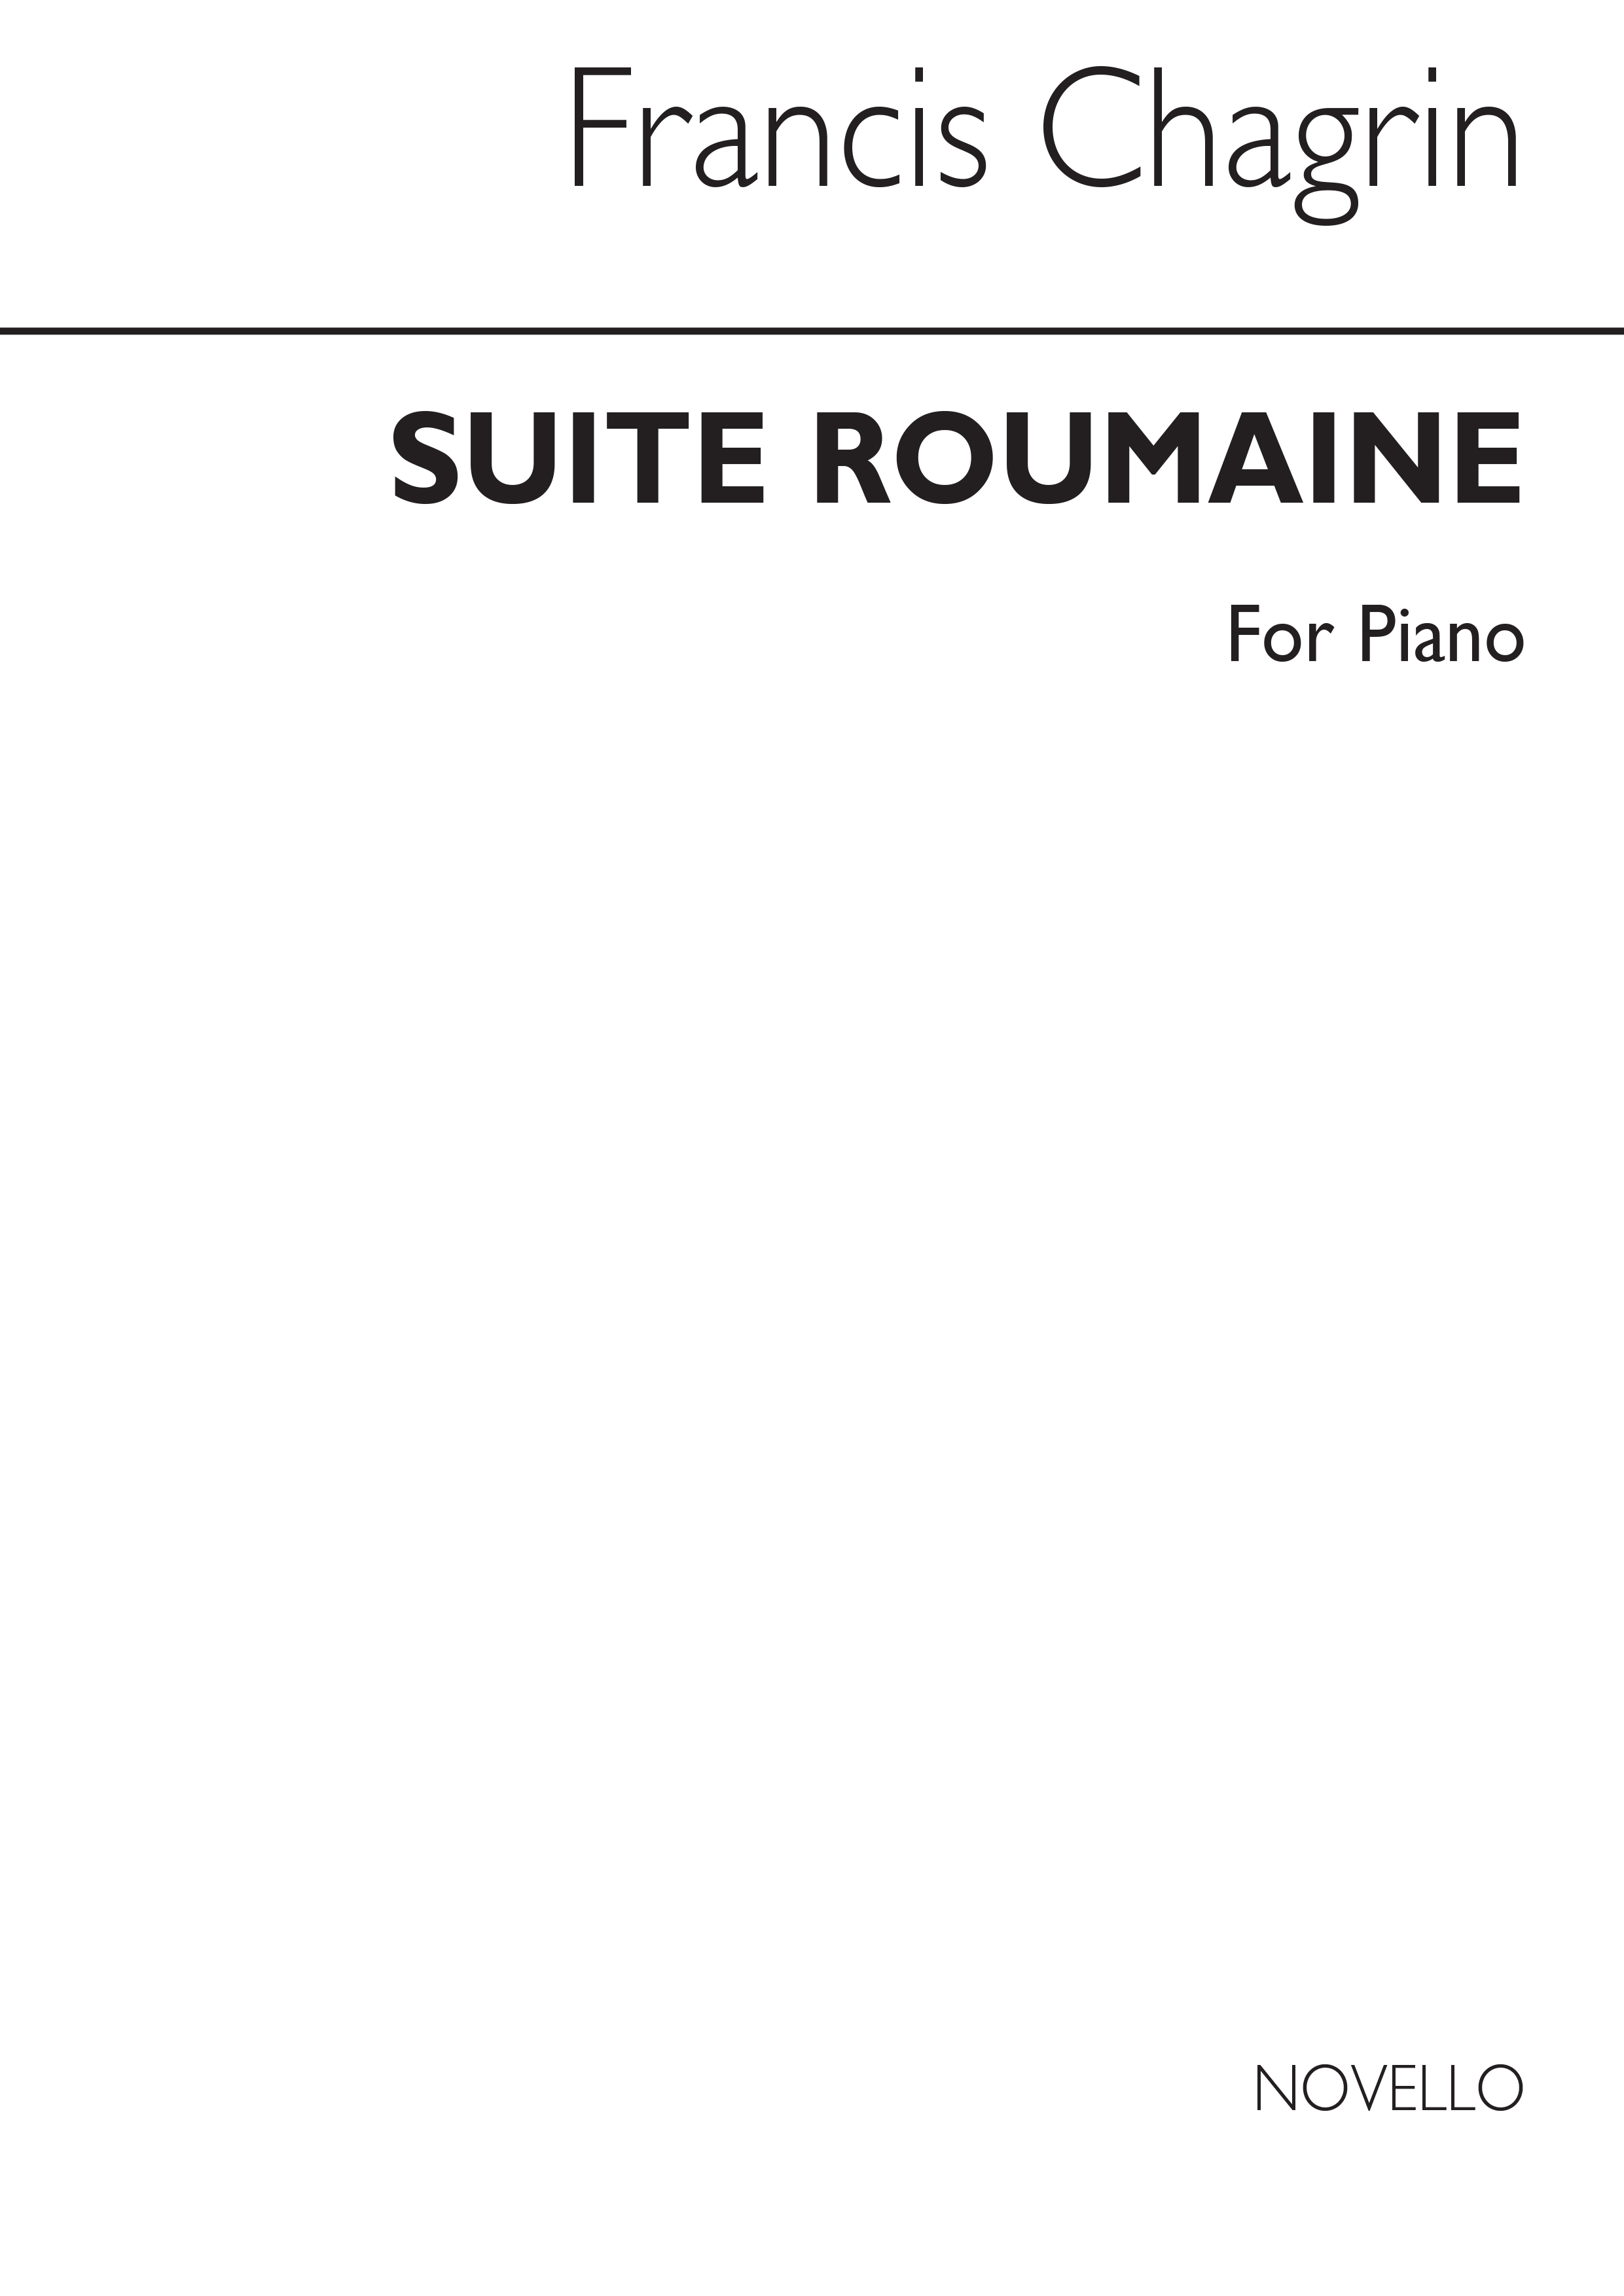 Francis Chagrin: Suite Roumaine